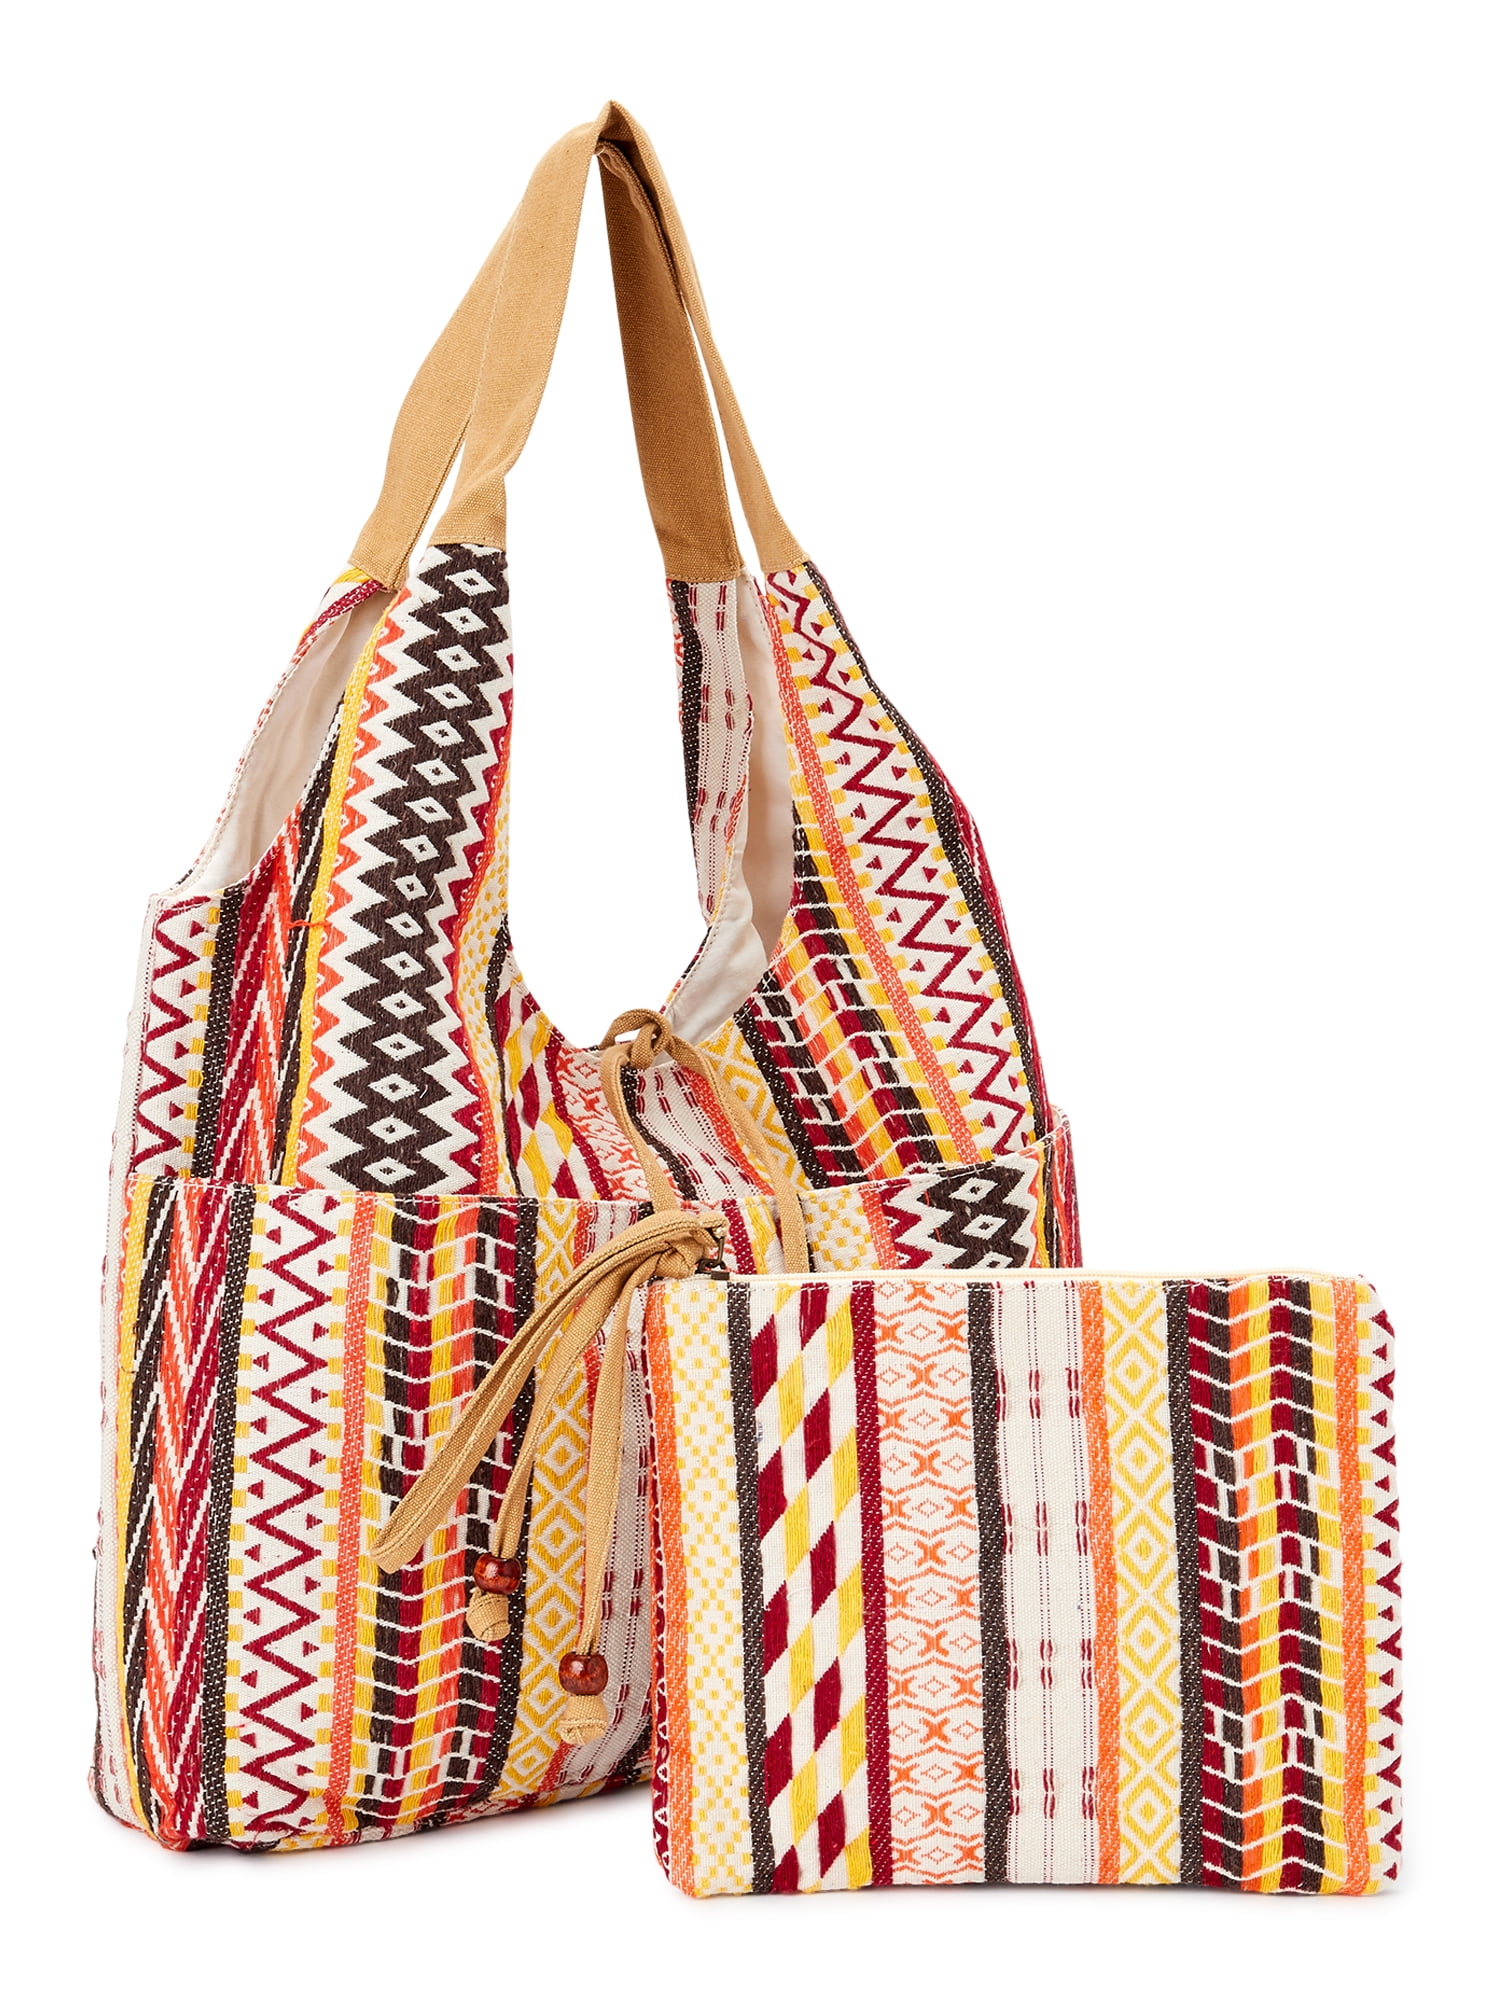 Grosgrain Stripe Beach Tote Bag Personalized Front Large